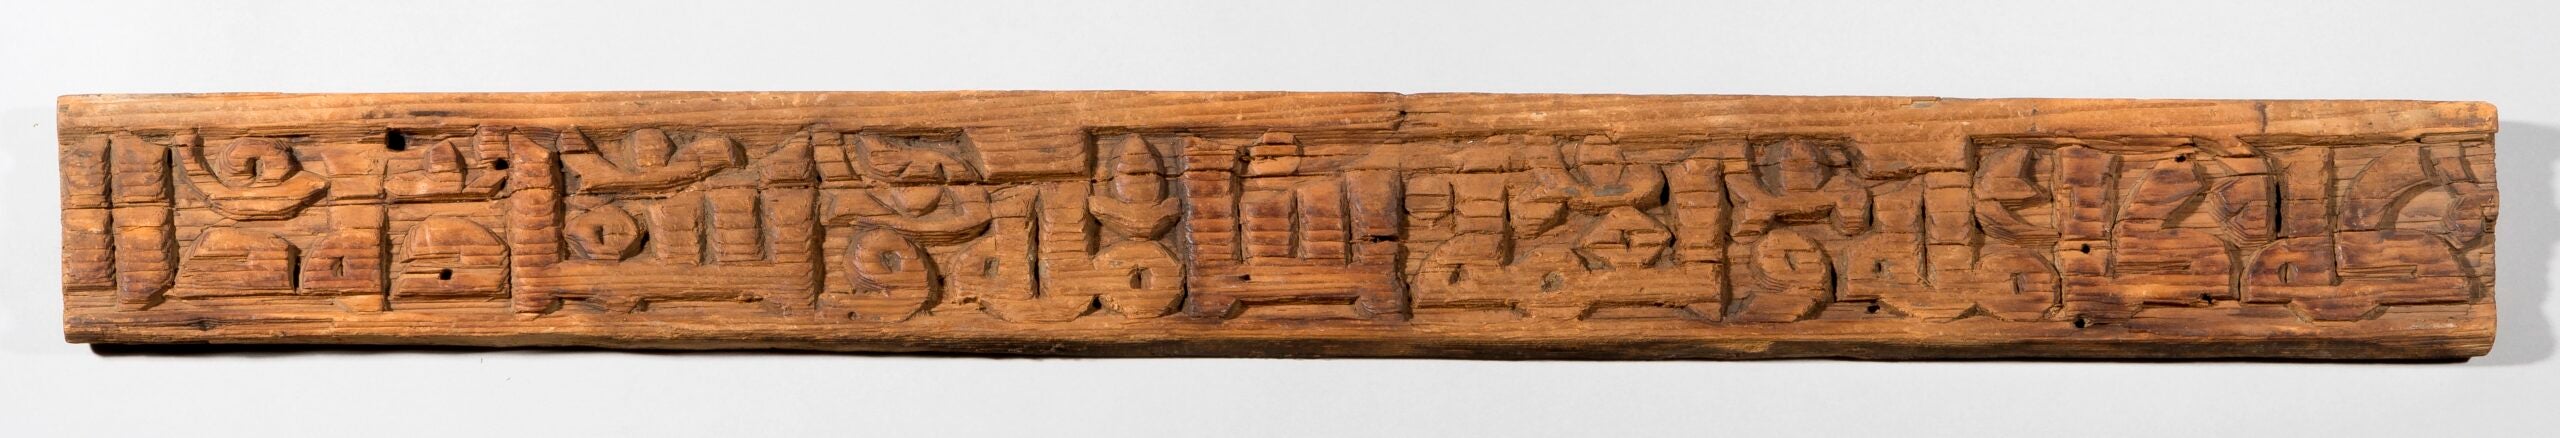 A long, narrow piece of wood with carved writing.